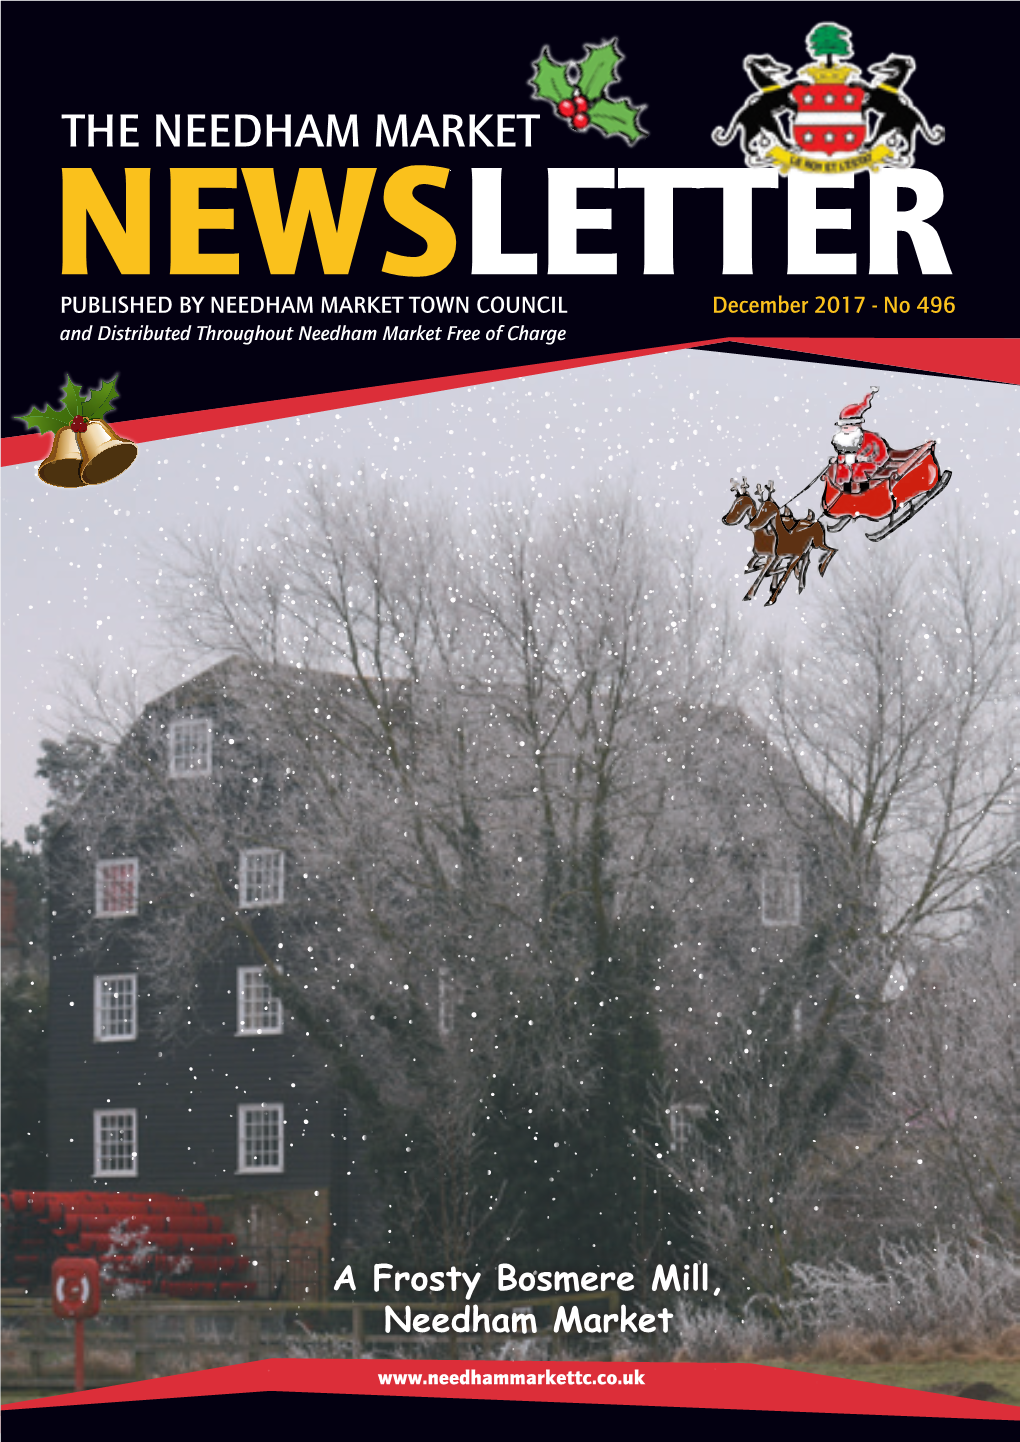 THE NEEDHAM MARKET NEWSLETTER PUBLISHED by NEEDHAM MARKET TOWN COUNCIL December 2017 - No 496 and Distributed Throughout Needham Market Free of Charge